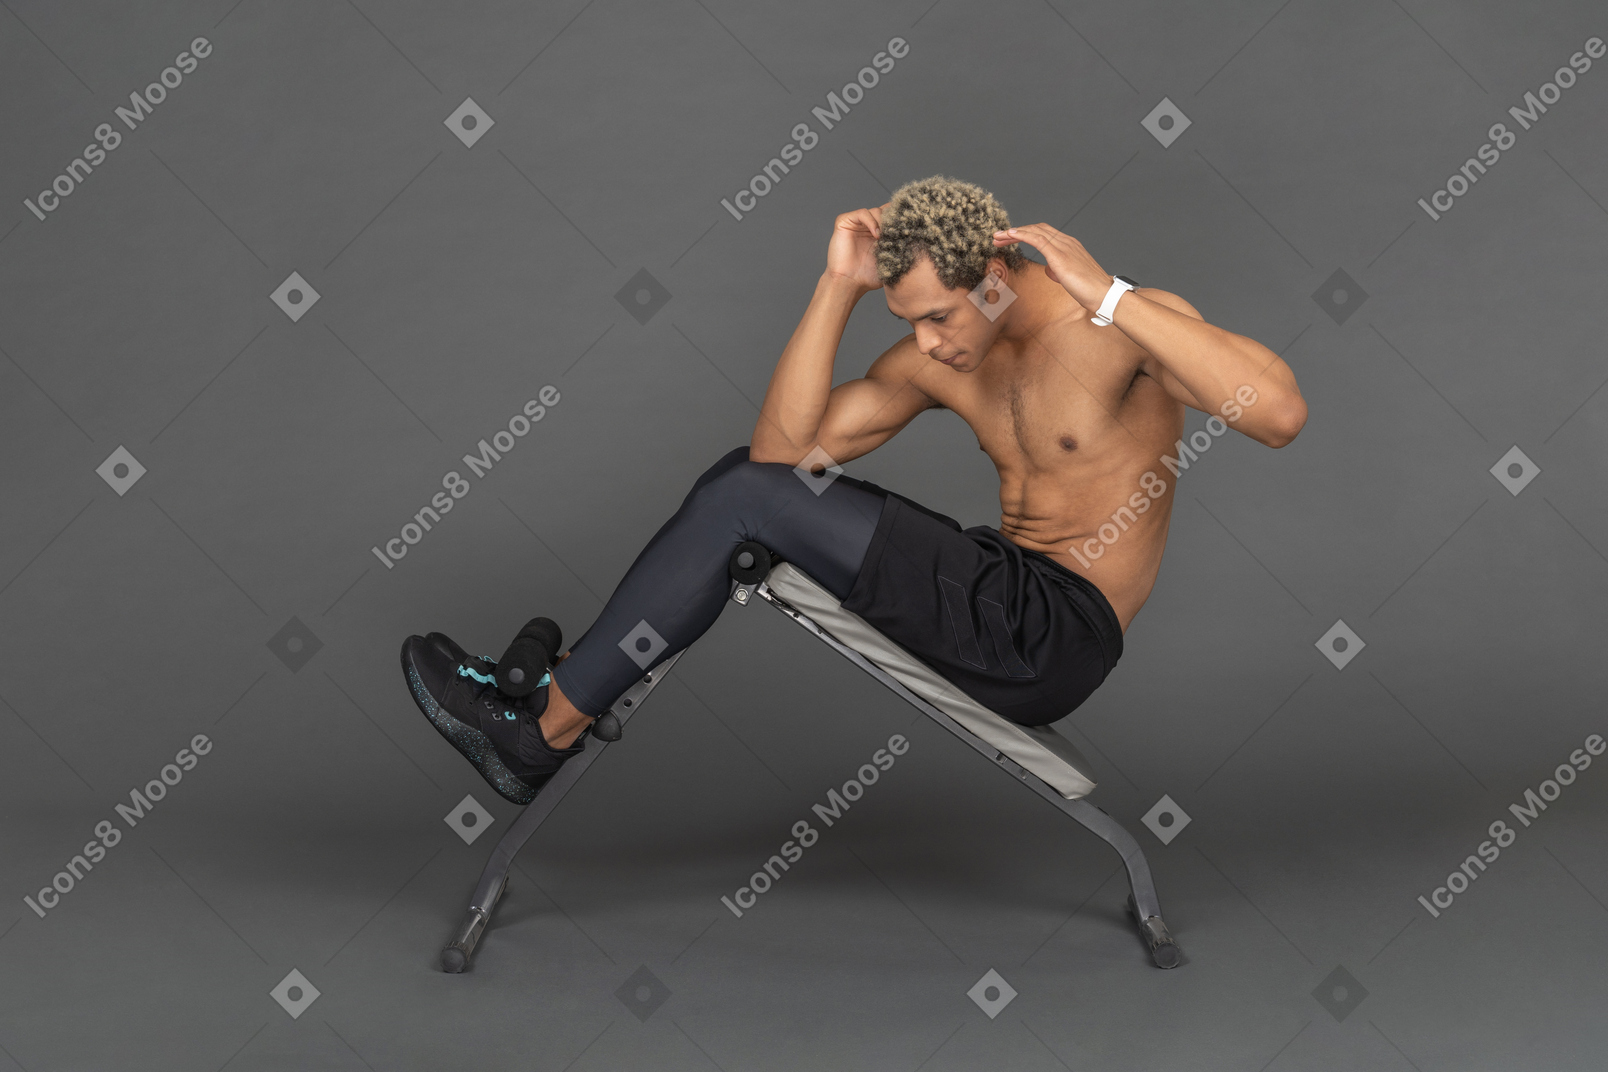 Man doing sit-ups on a bench